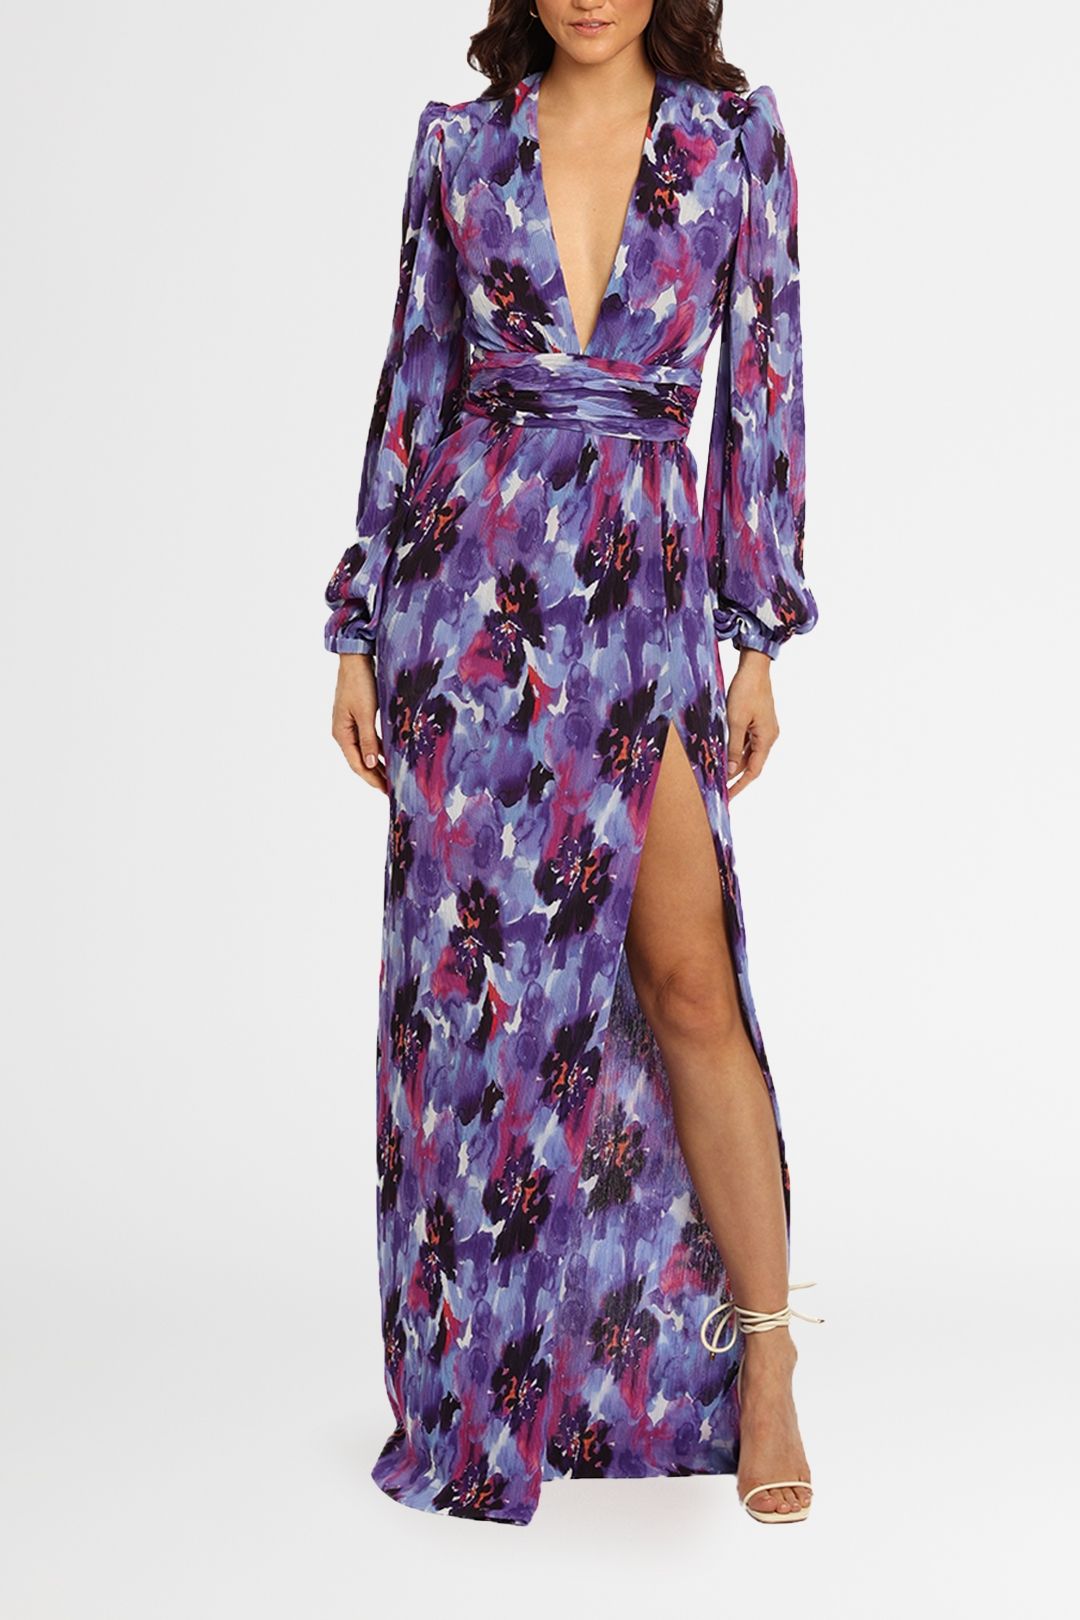 Red Carpet Luxe Purple Stretch Backless Plunge Maxi Dress